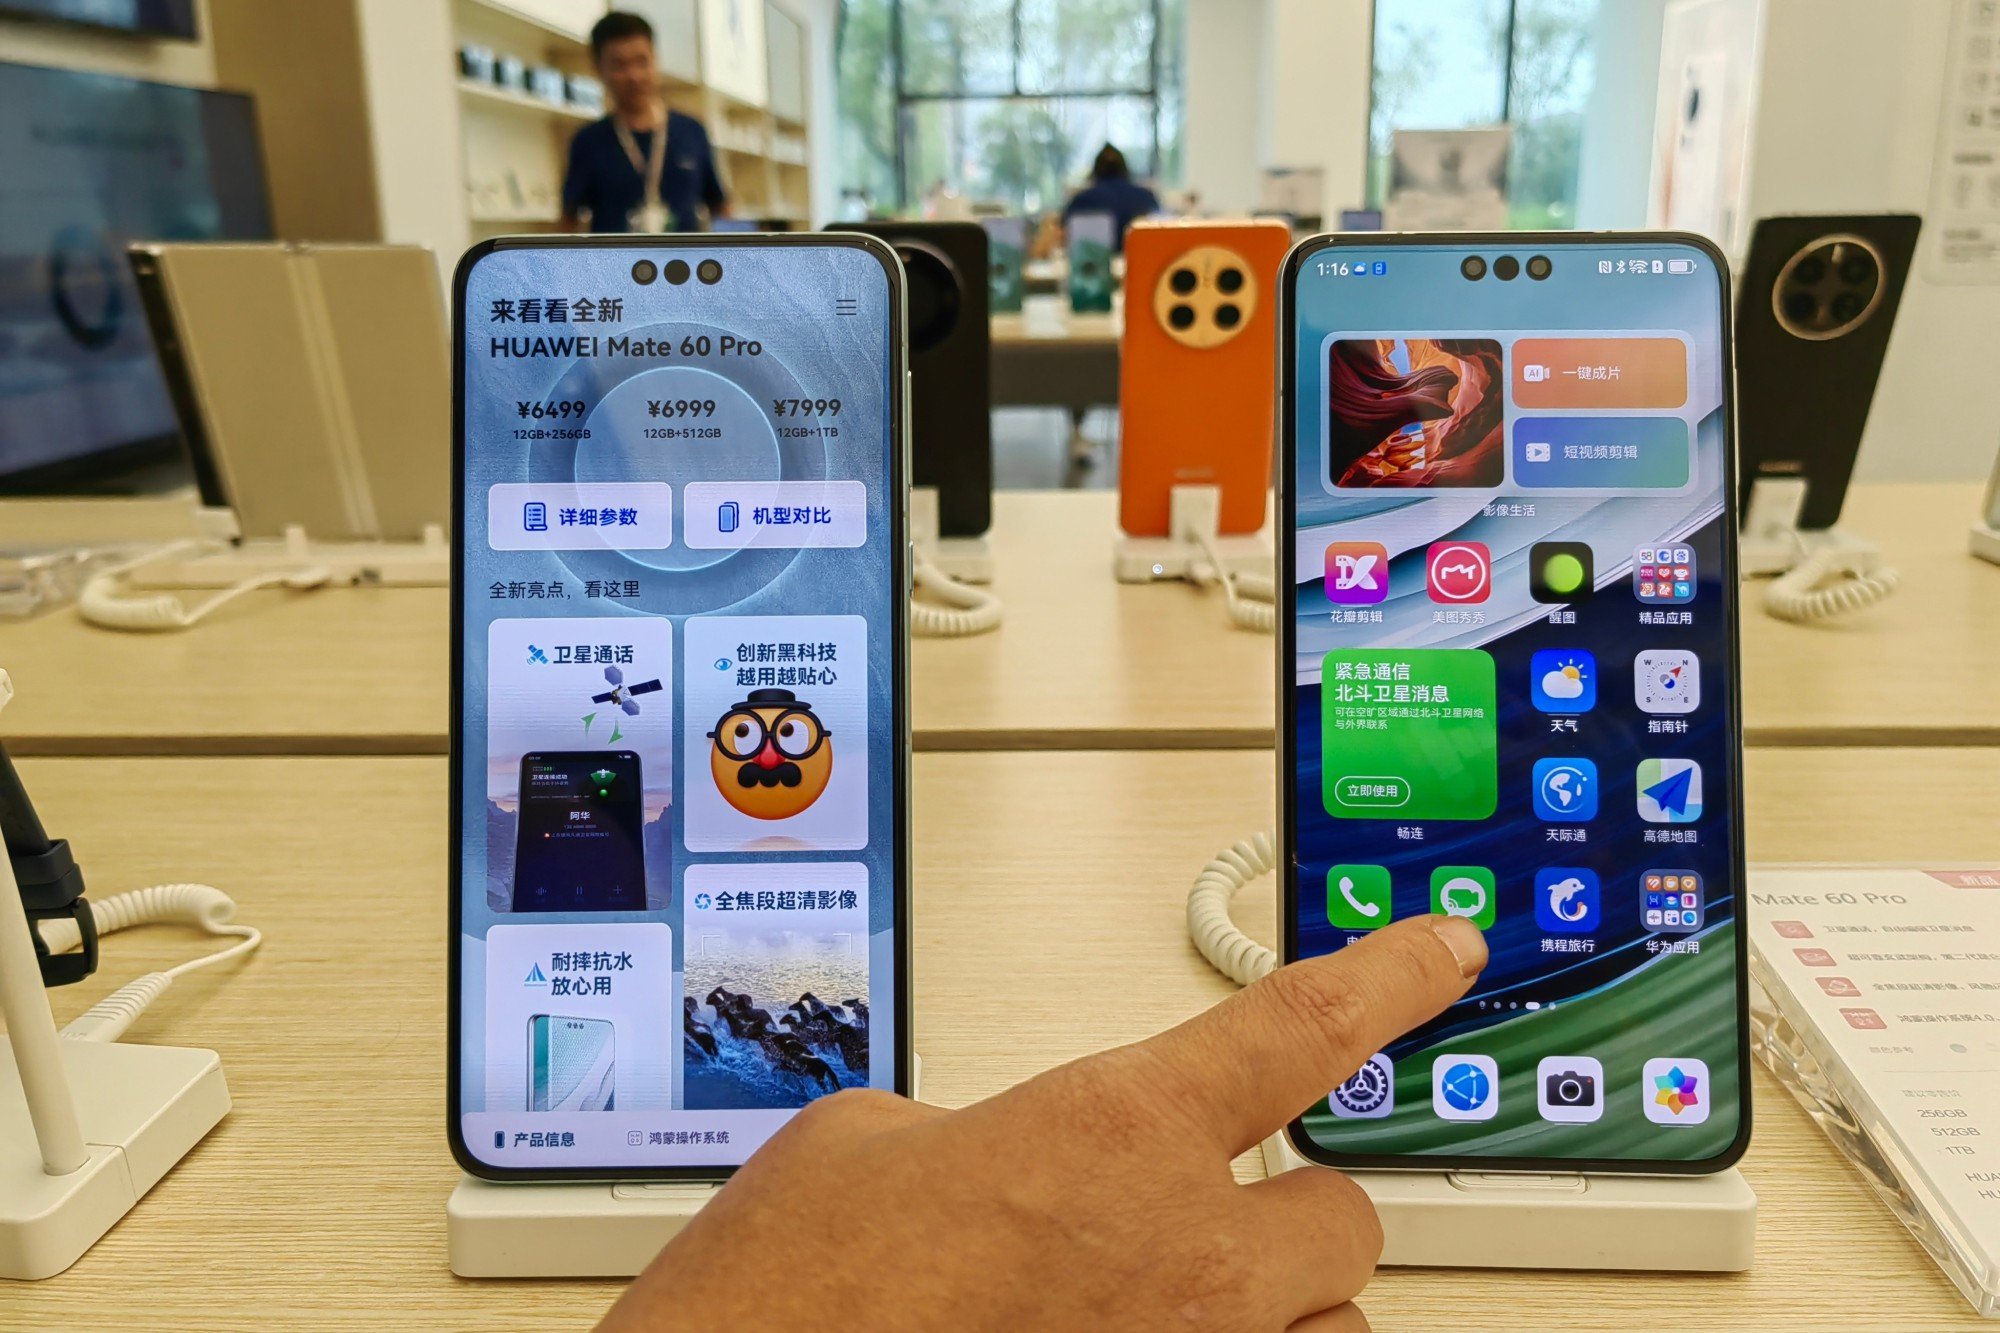 Huawei's HarmonyOS to beat Apple's iOS as the No. 2 smartphone operating  system in China in 2024: TechInsights report